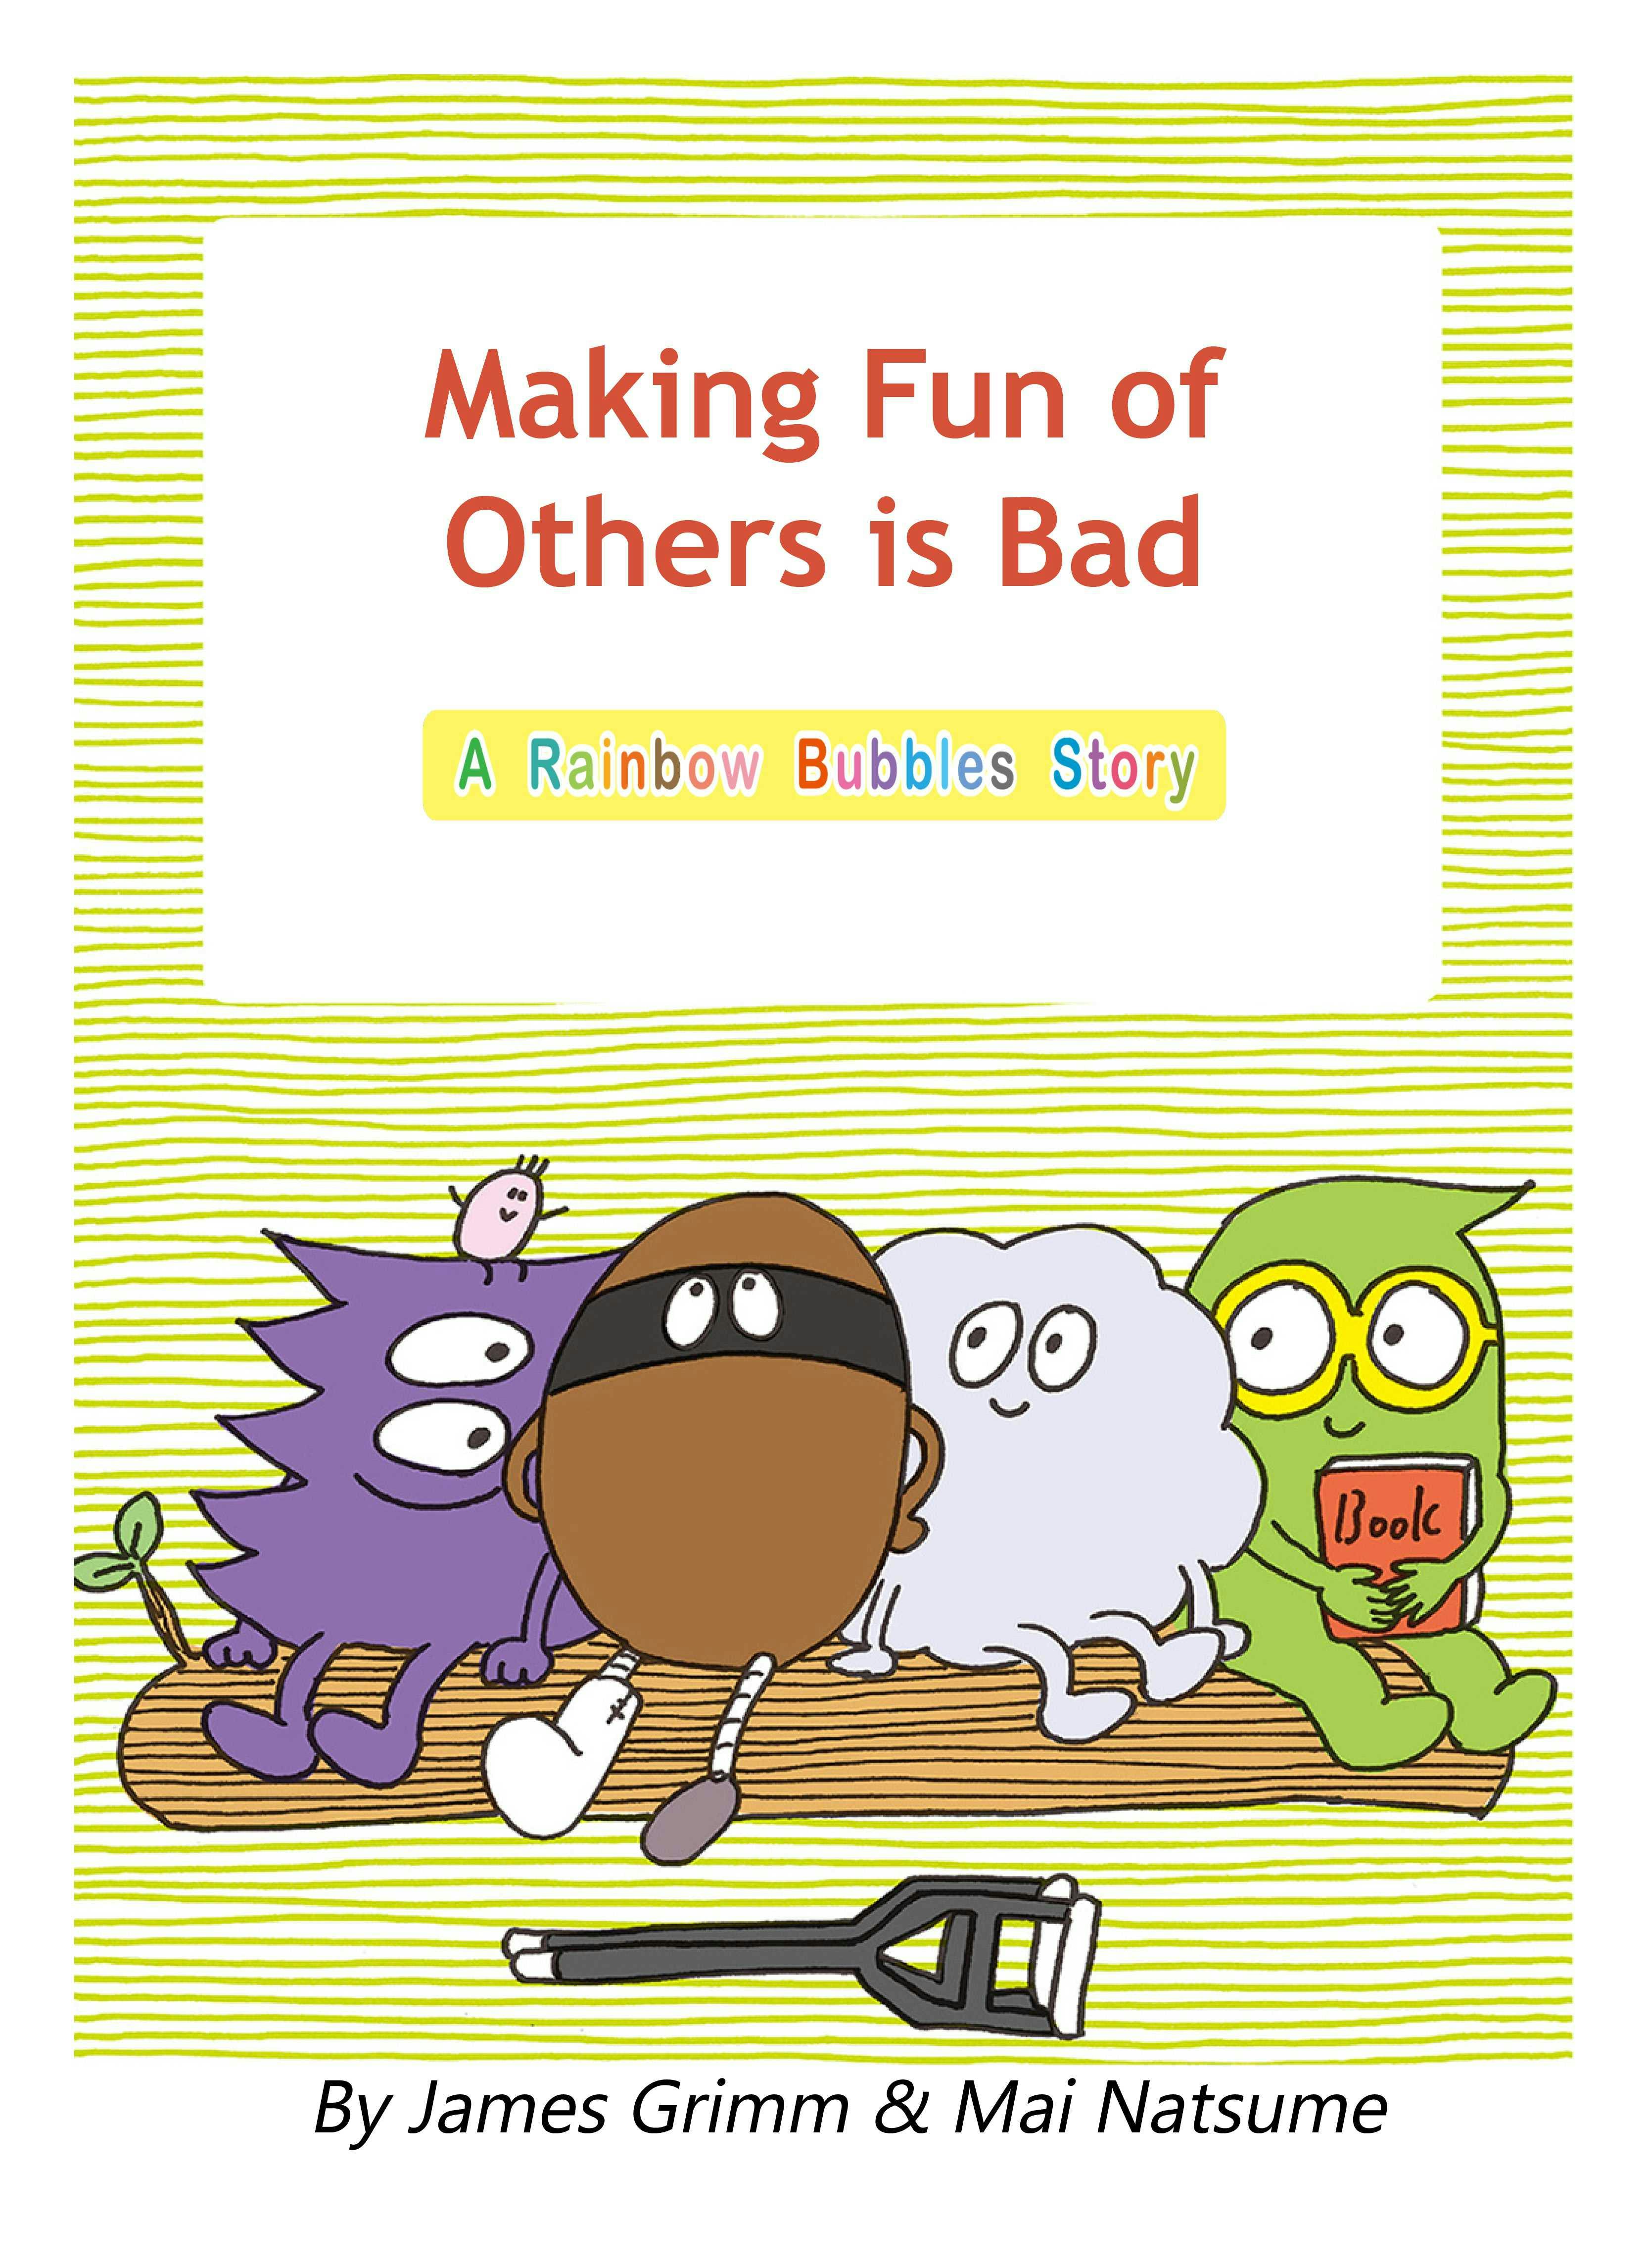 Making Fun of Others is Bad - James Grimm